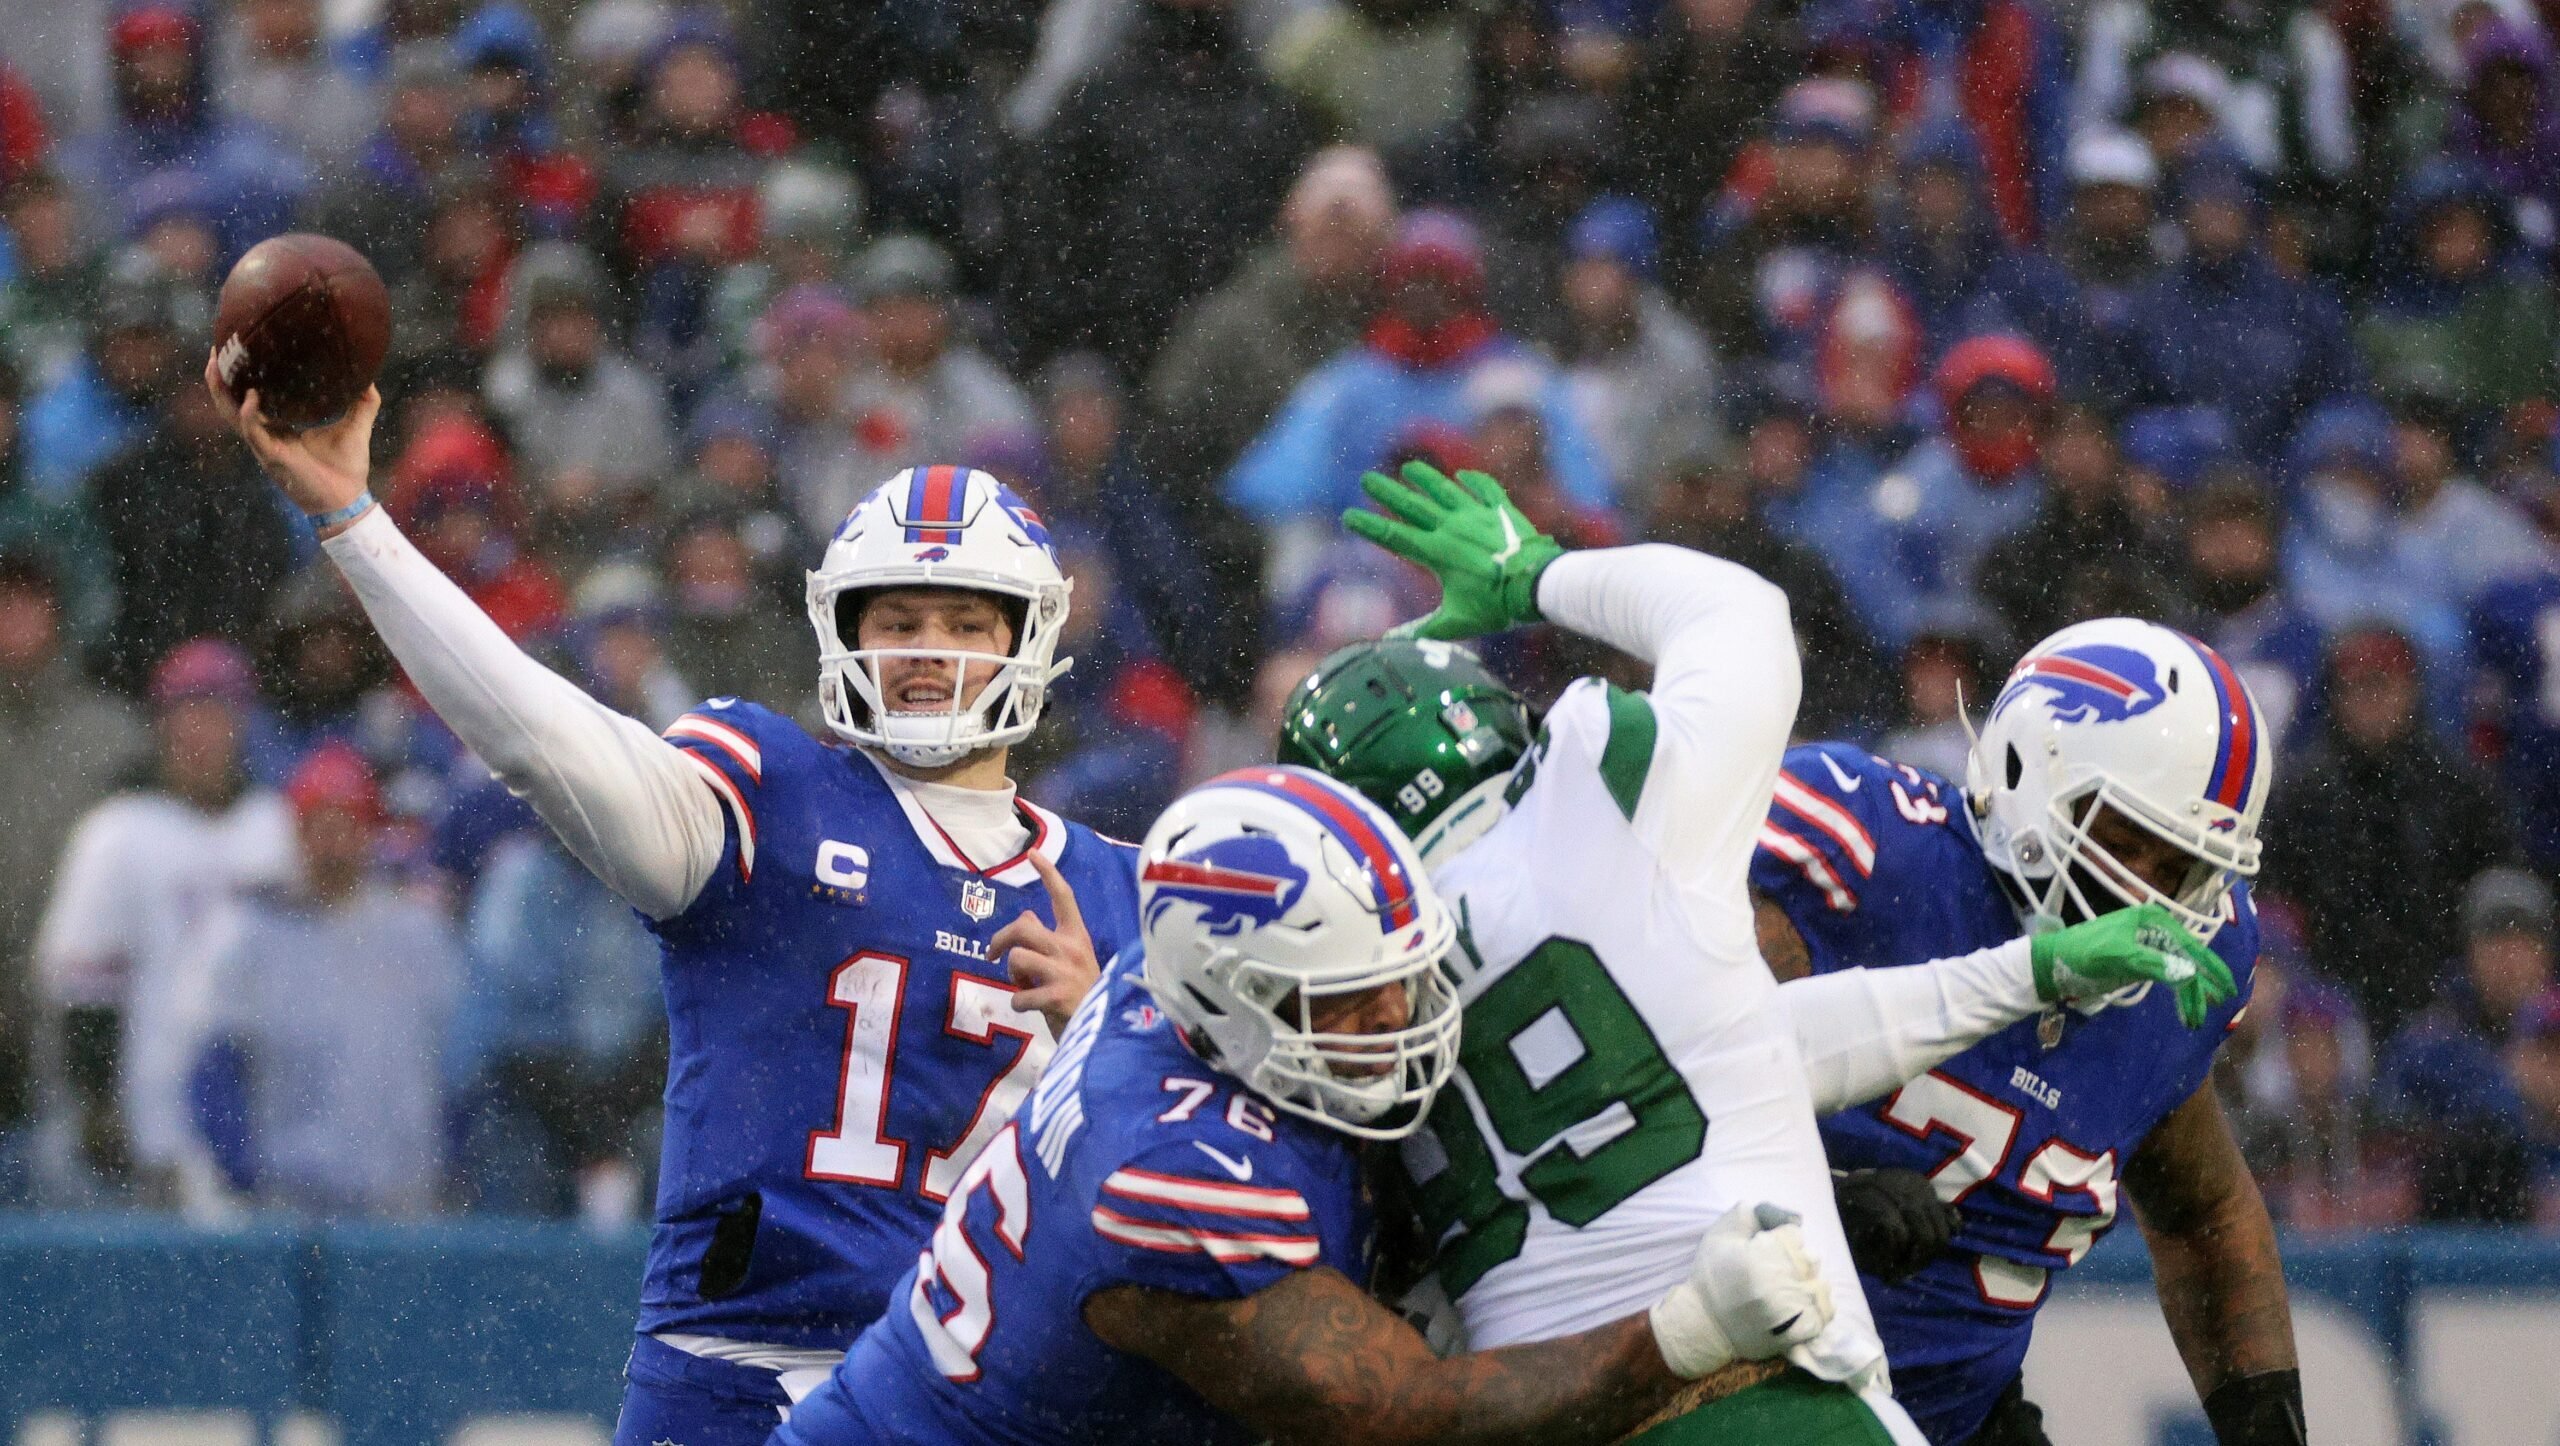 Buffalo Bills vs. New York Jets: Time, TV channel, preview, live